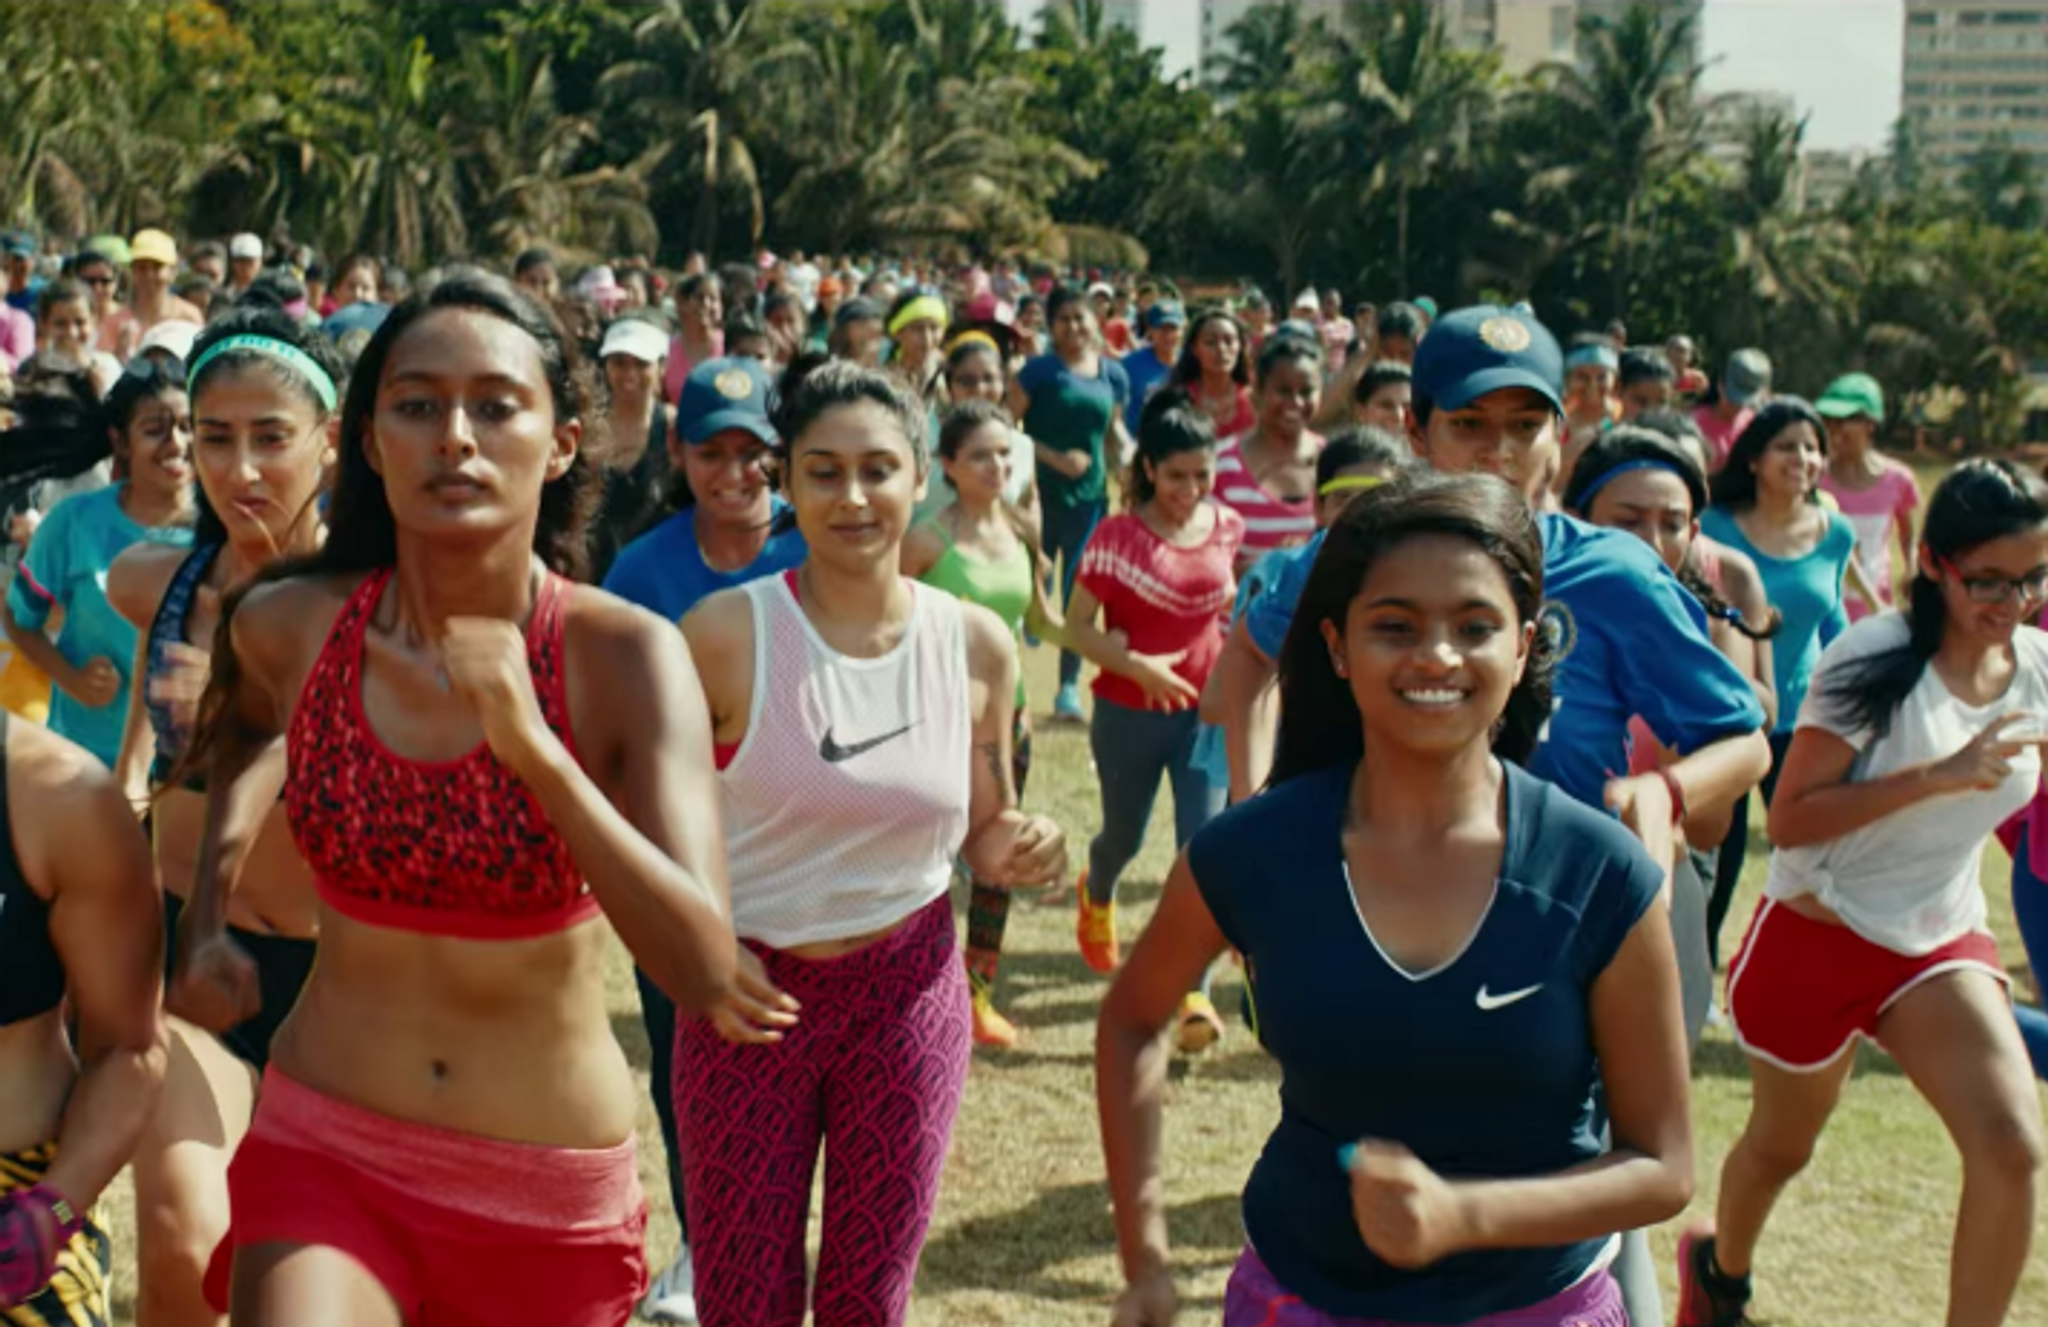 Nike wants women in India to take part in sports